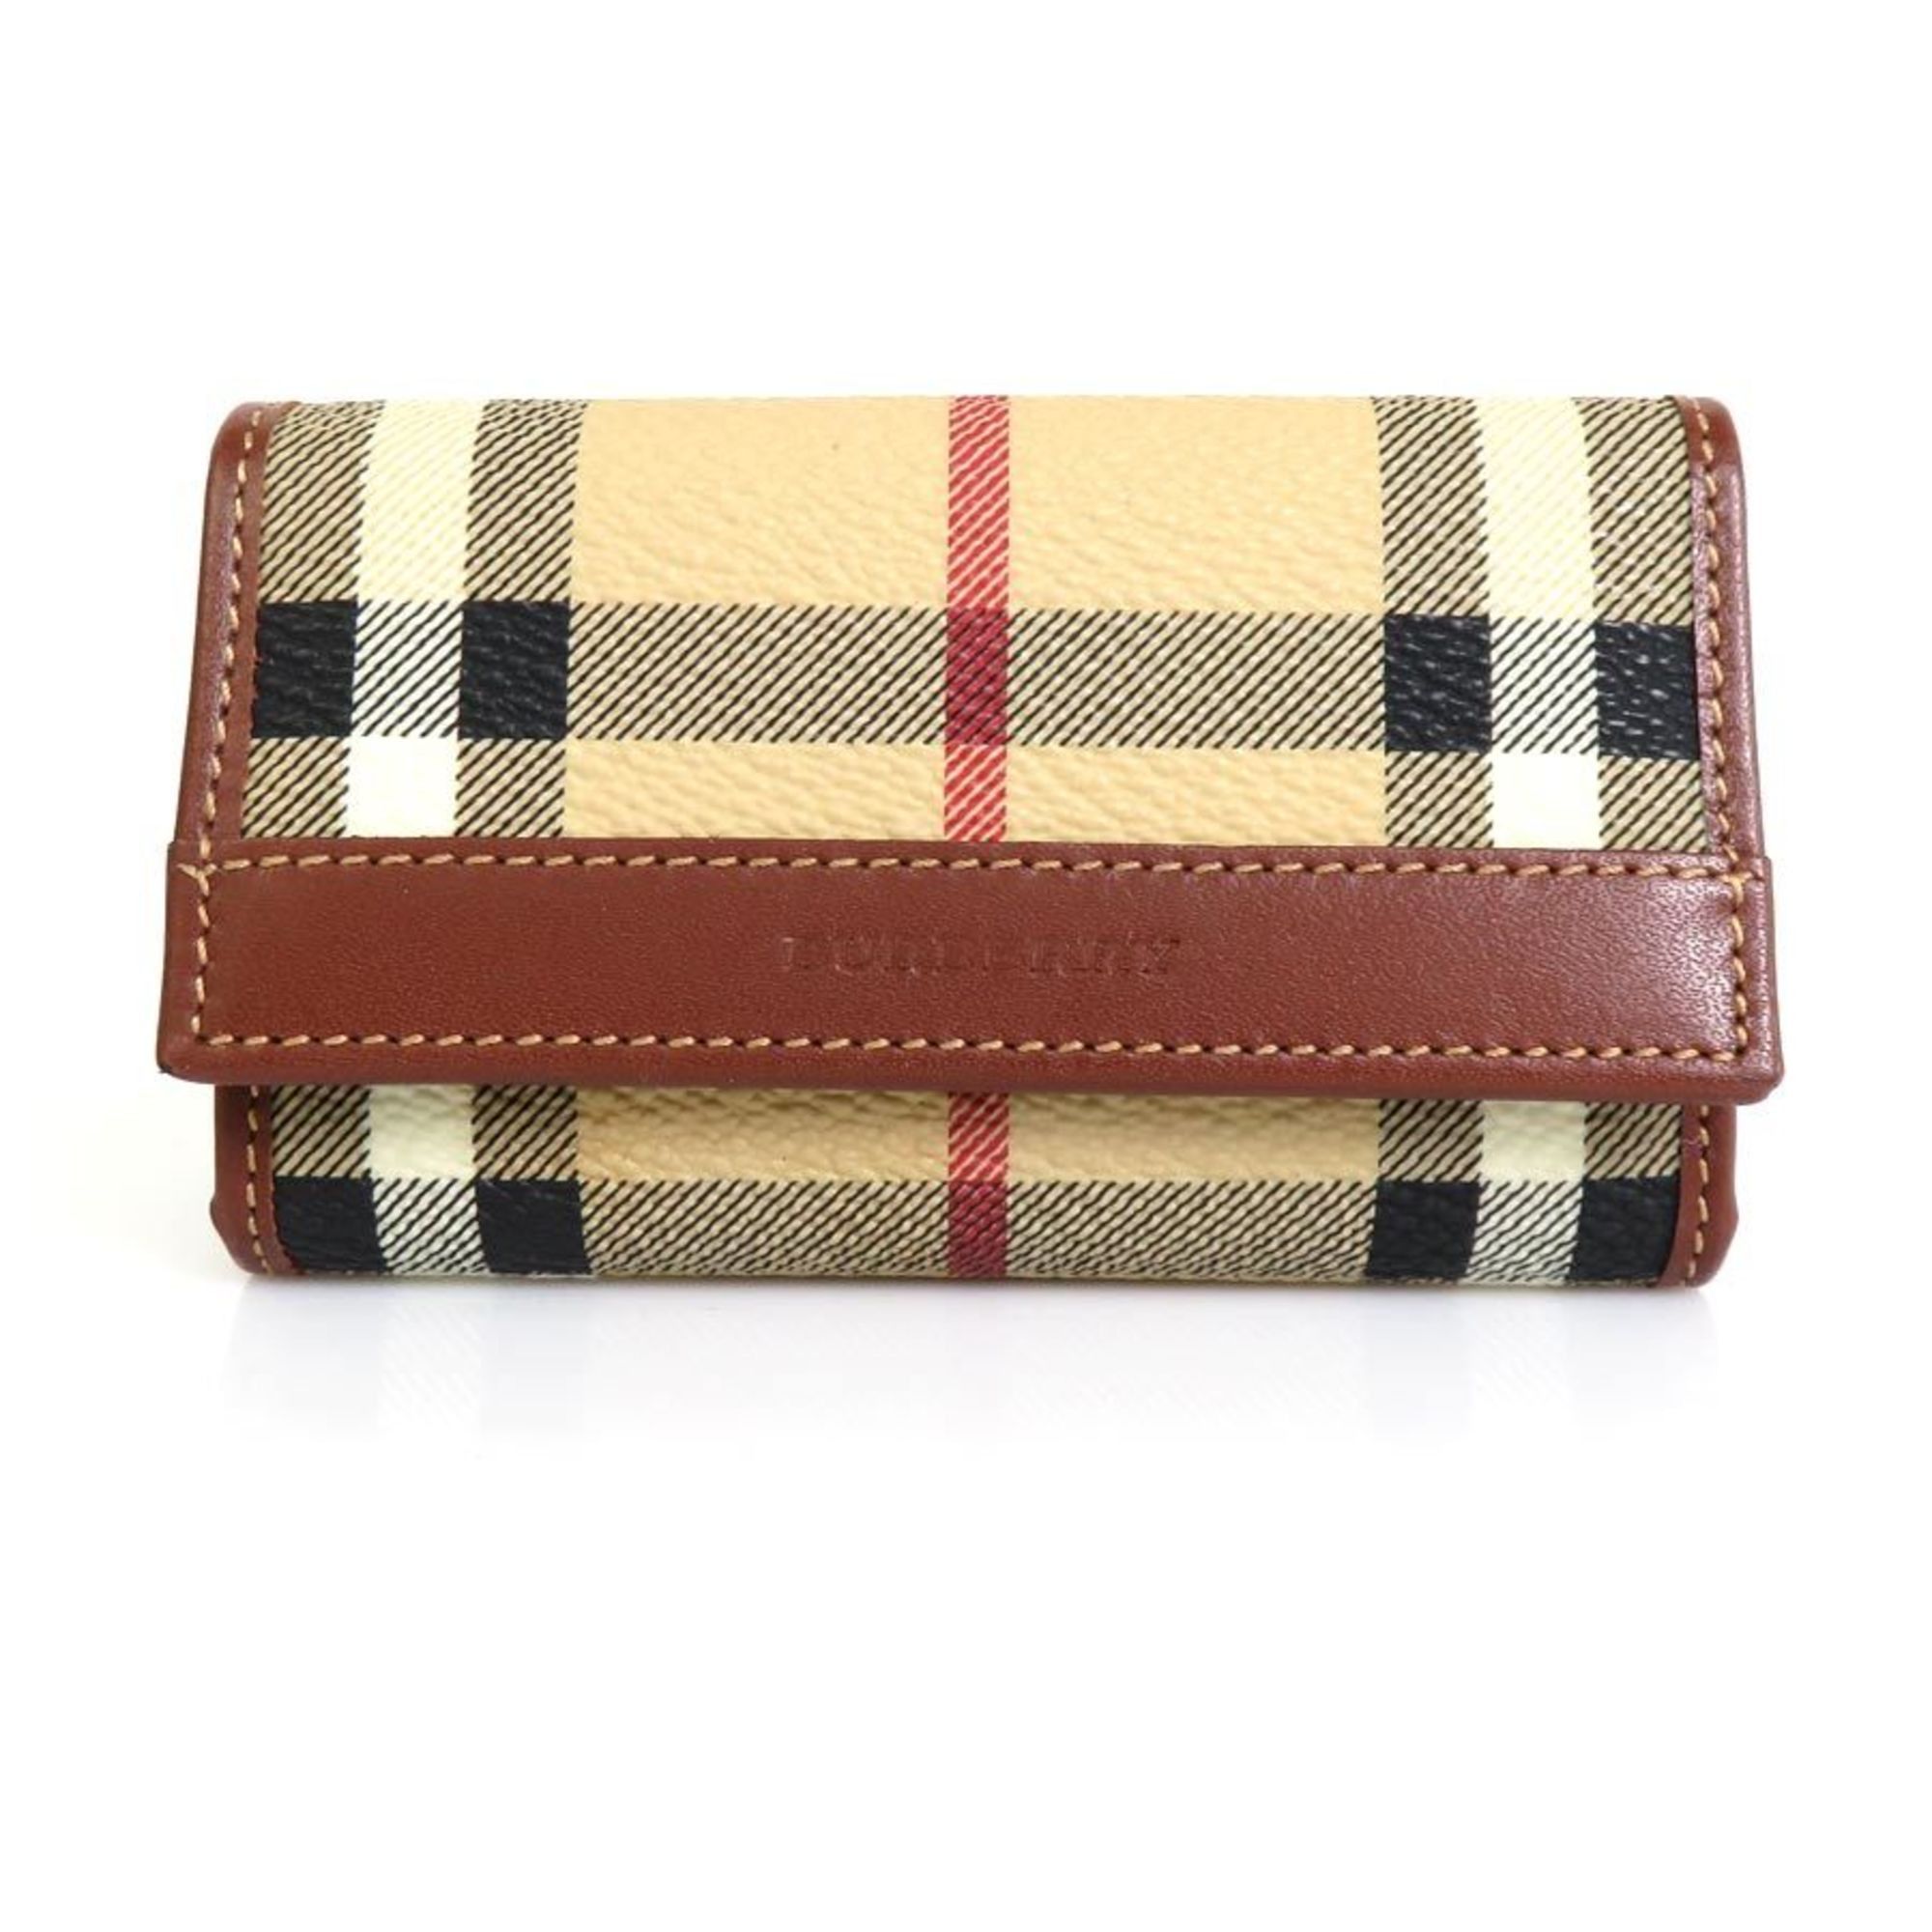 Burberry wallet | Grailed